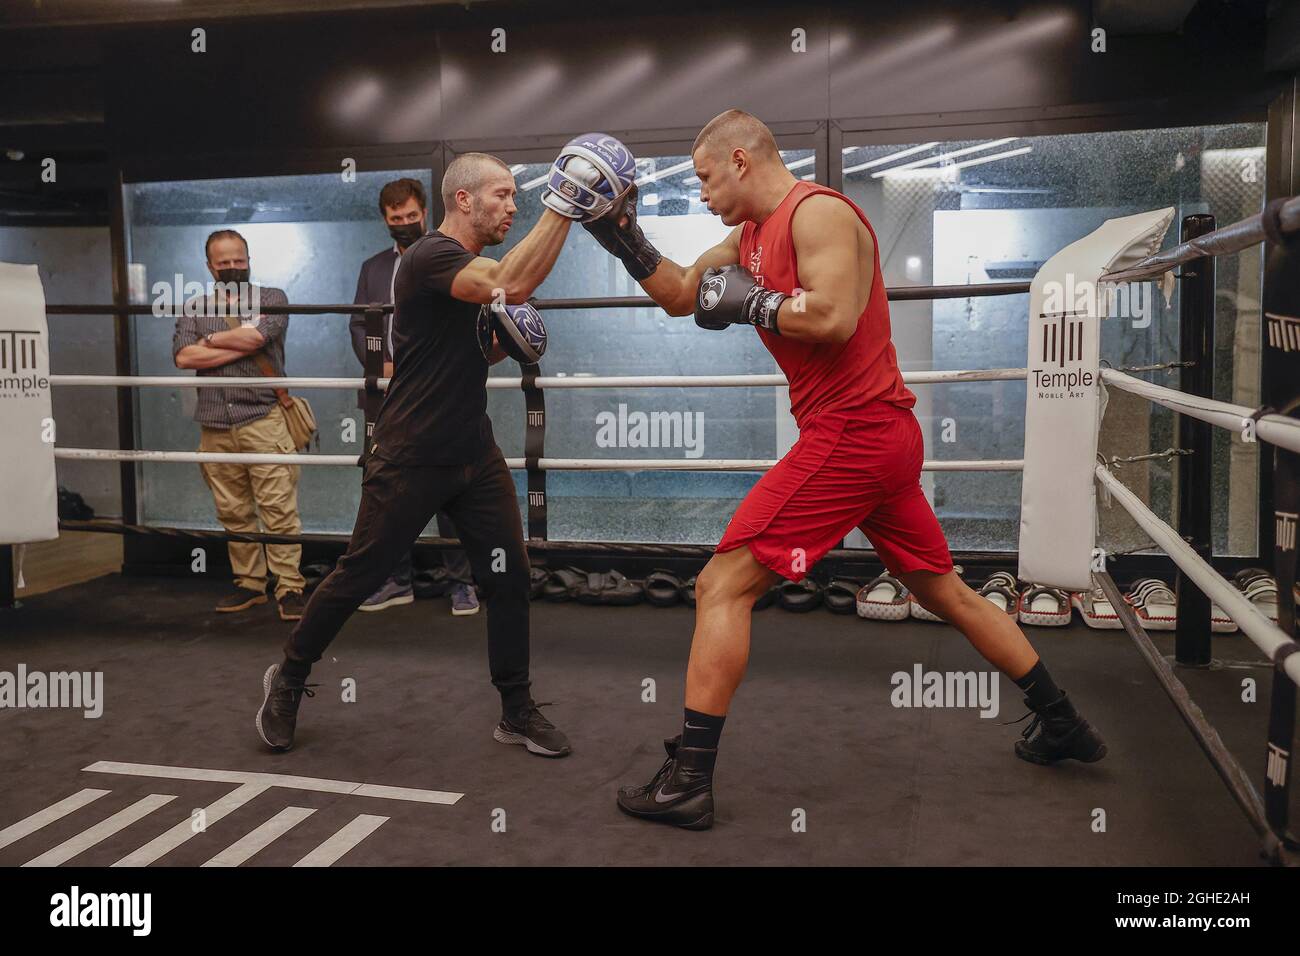 Petar MILAS during the private training session before the boxing meeting  to be held at Roland Garros, at the Temple Noble Art in Paris France on  September 06, 2021, Photo by Loic